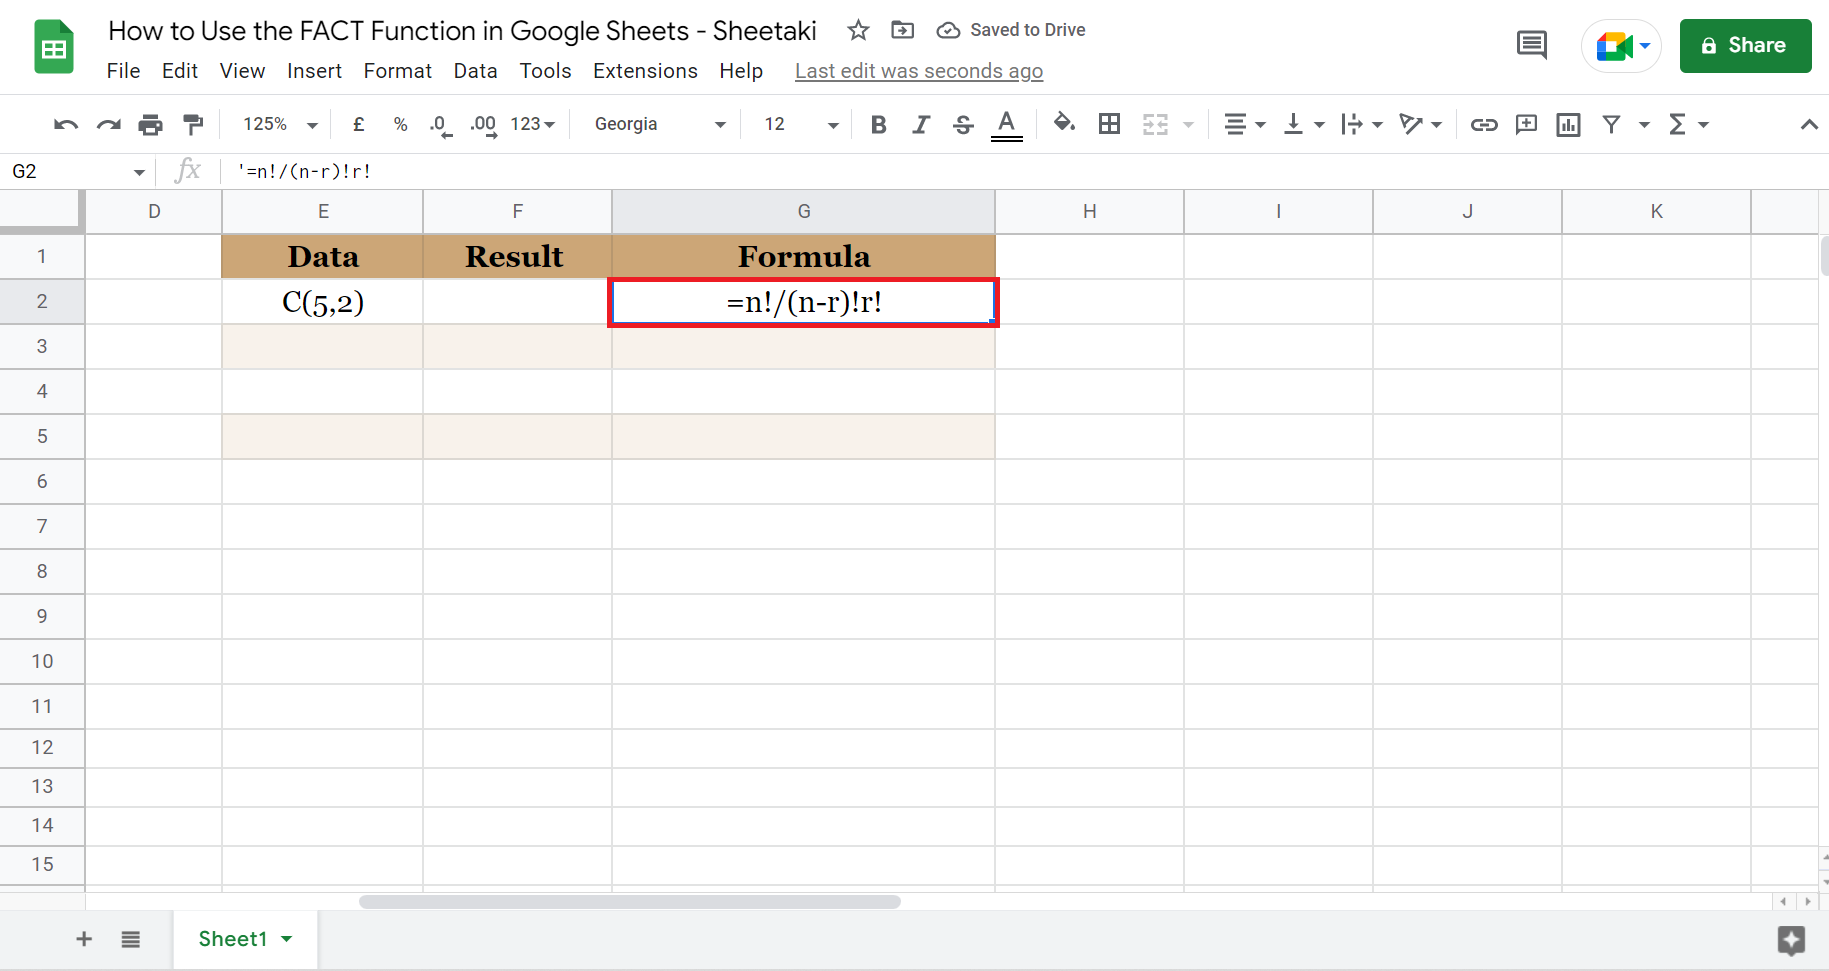 FACT Function in Google Sheets